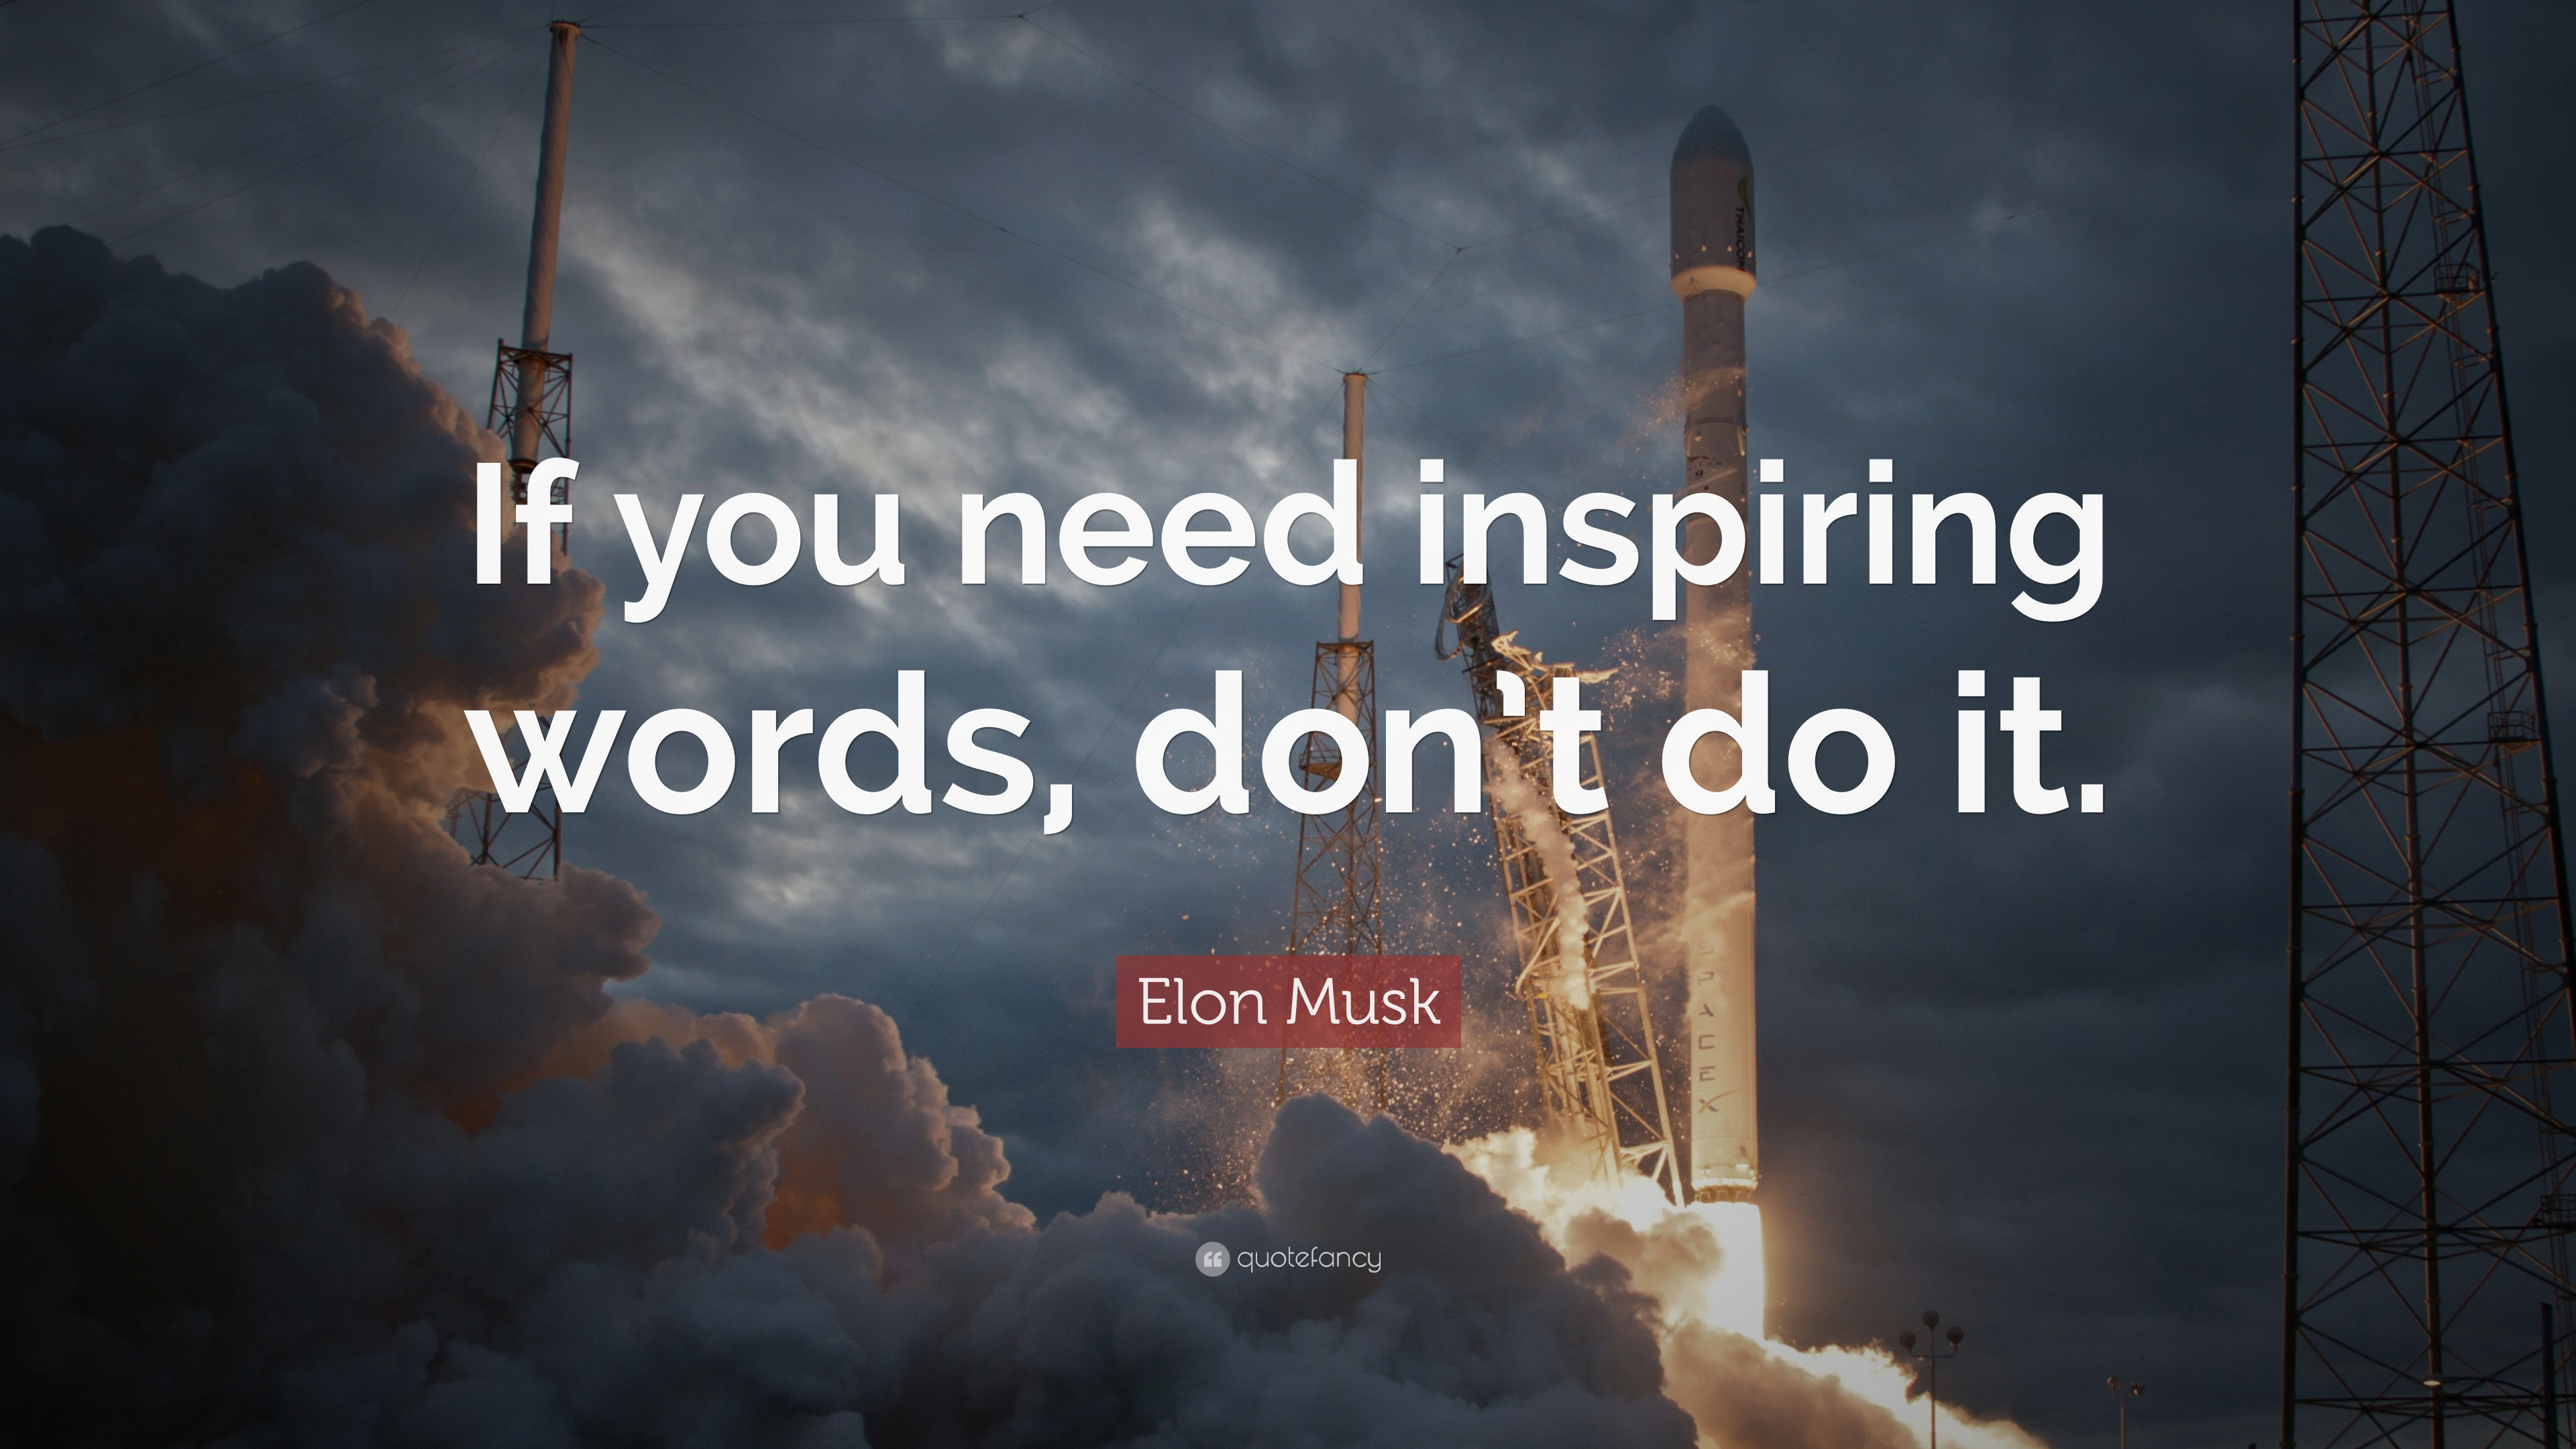 Elon Musk Quote If you need inspiring words, dont do it